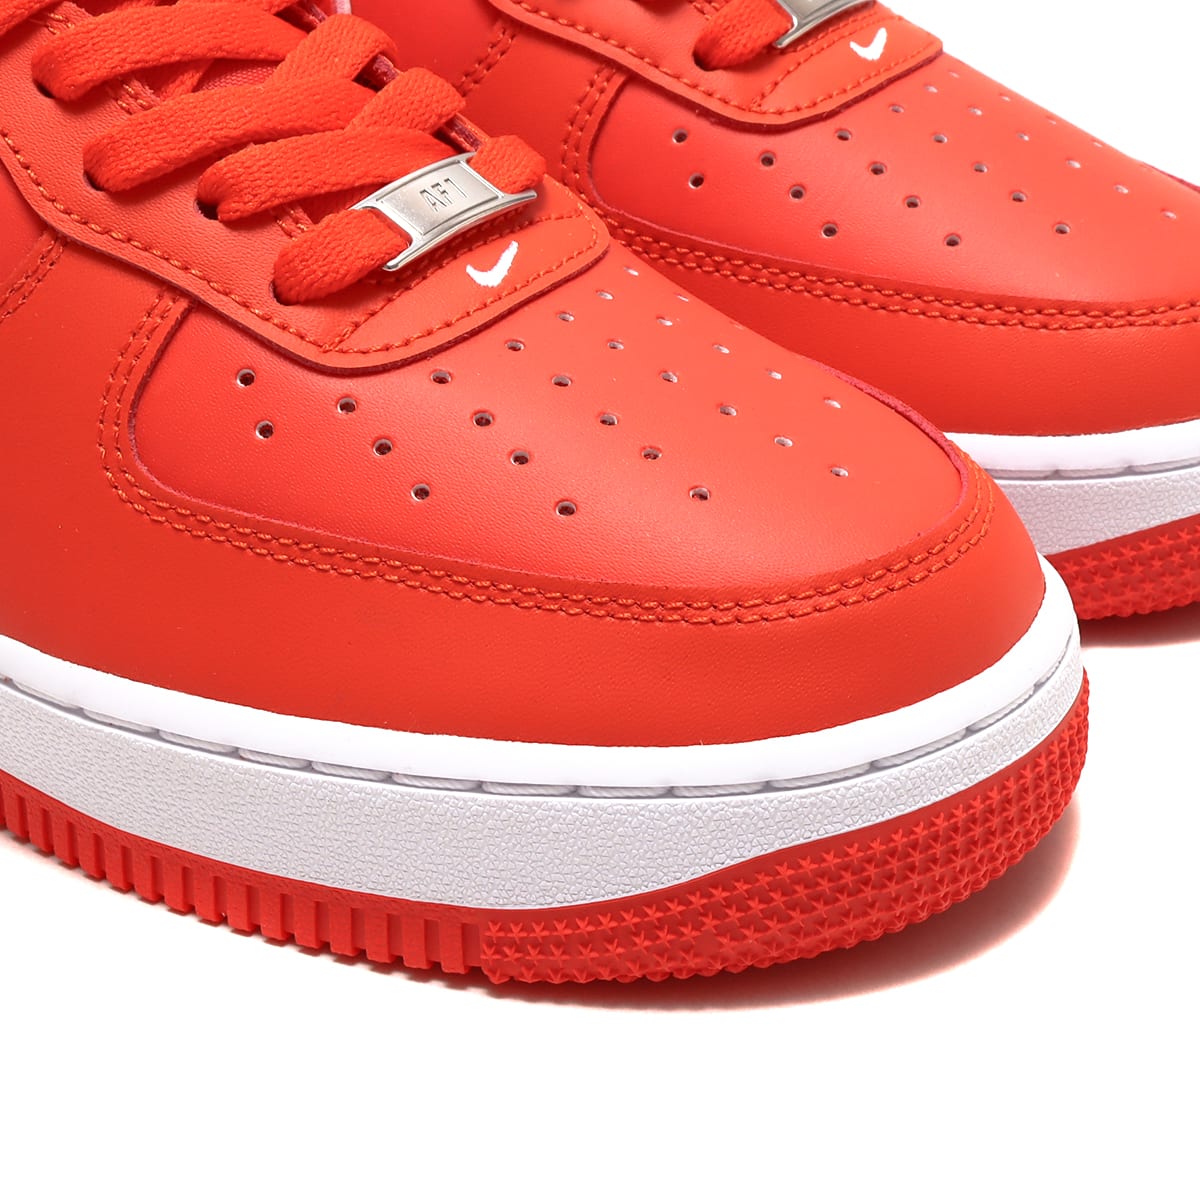 NIKE AIR FORCE 1 '07 PICANTE RED/PICANTE RED-WHITE 23SP-I